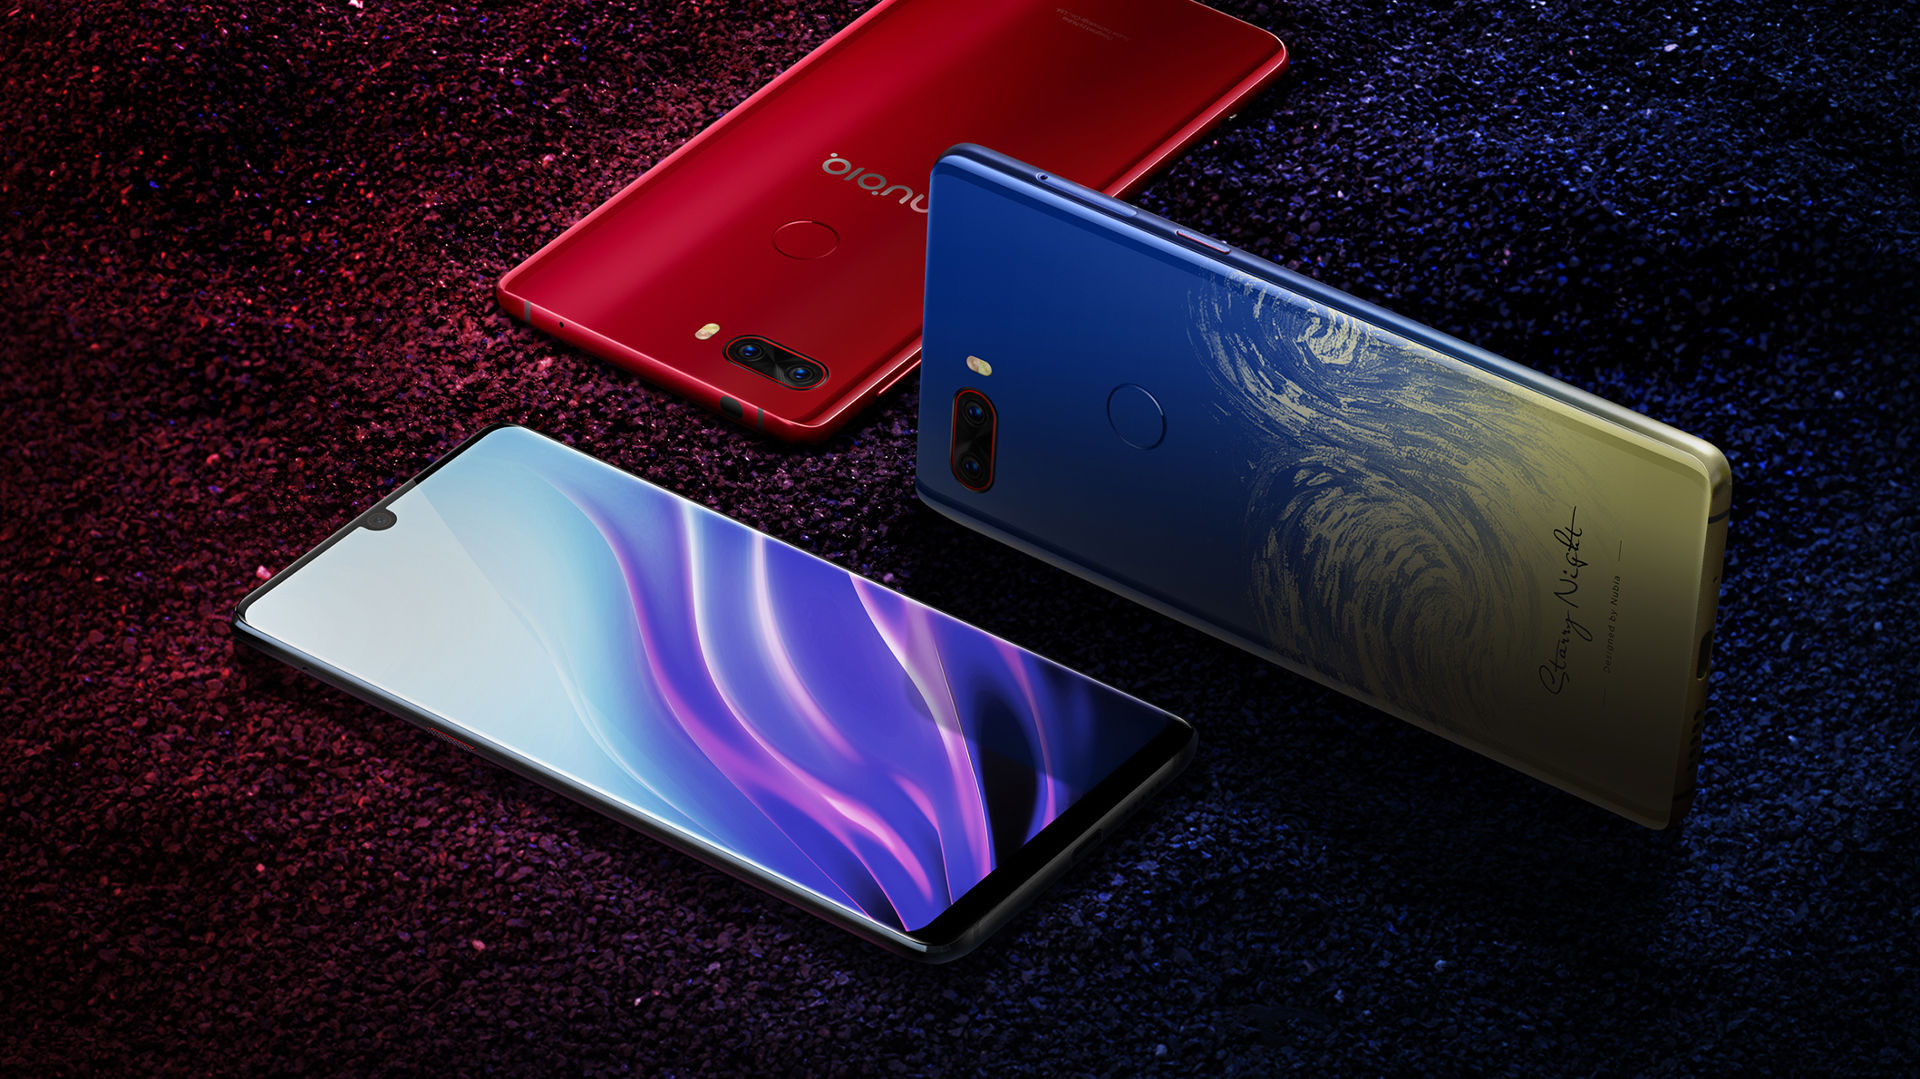 The Nubia Z18, including the Starry Night option.